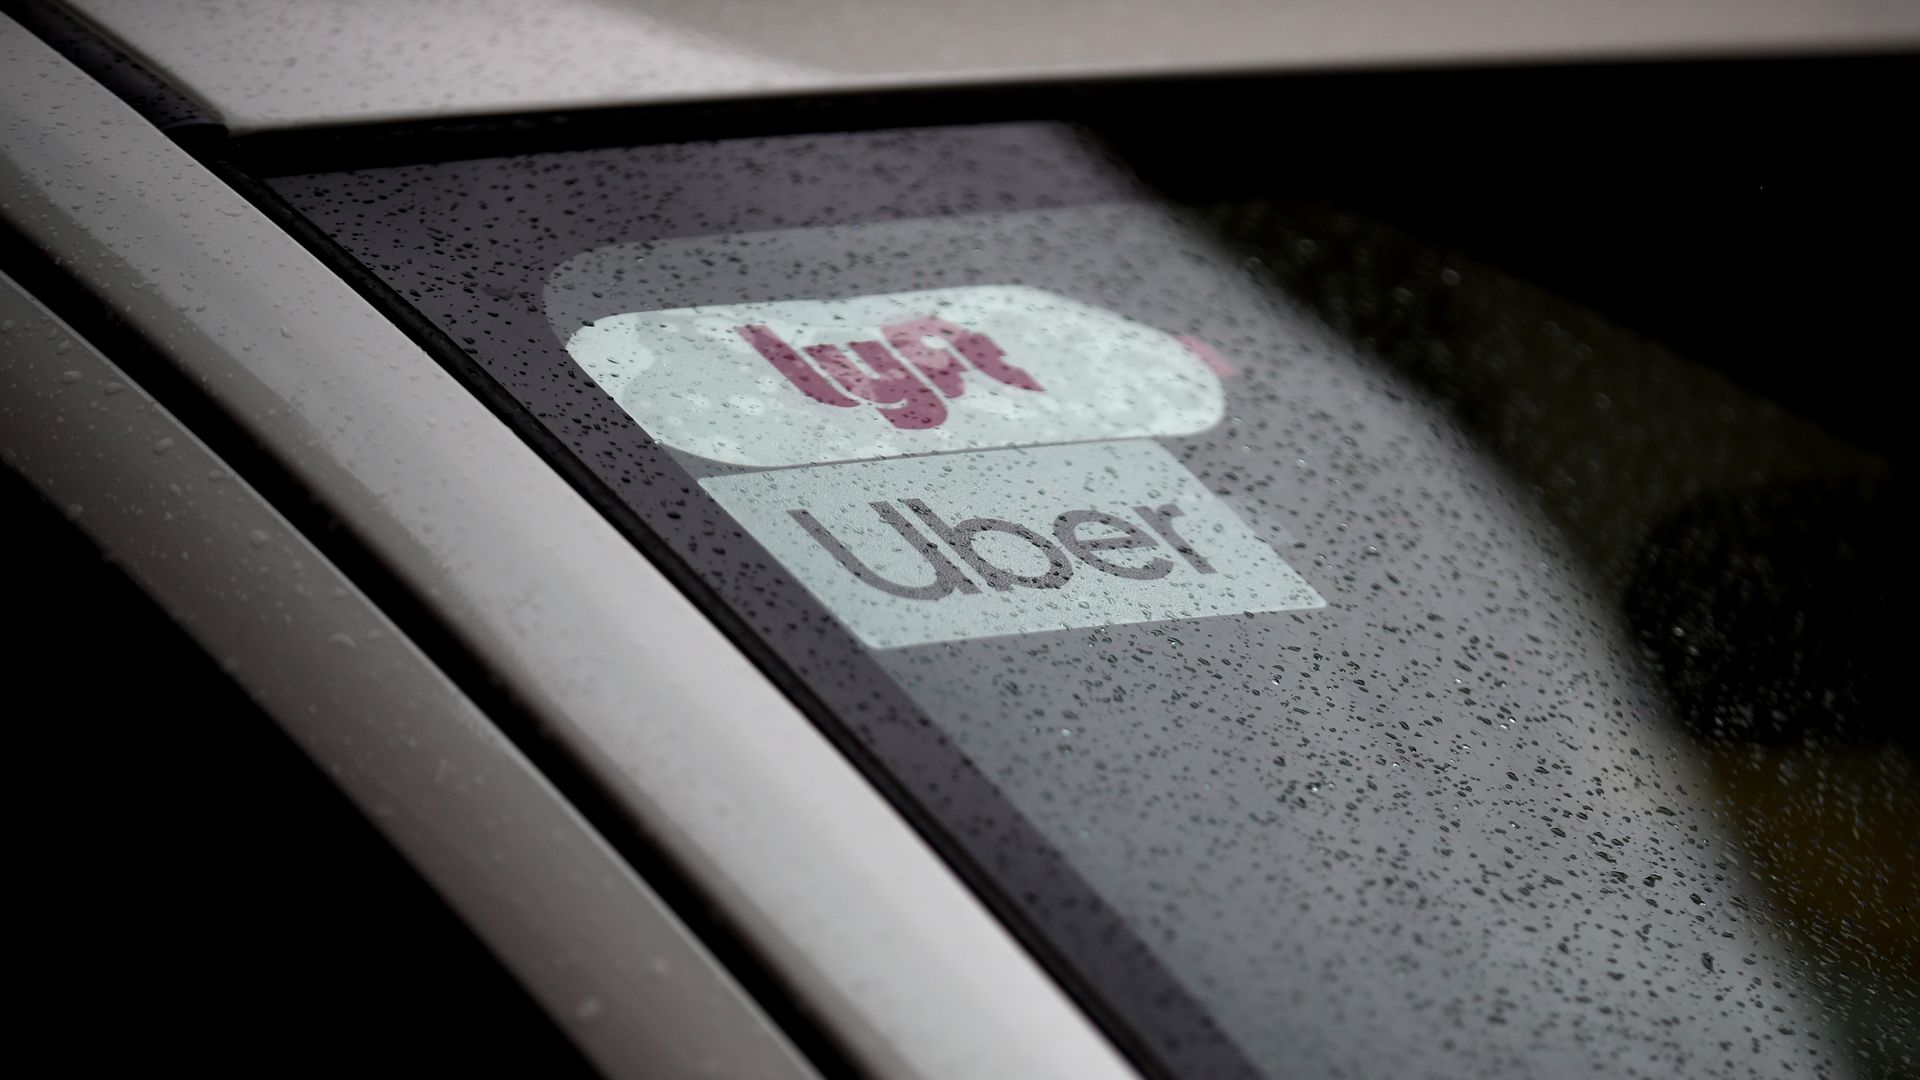 In this image, a Lyft sticker is above an Uber sticker